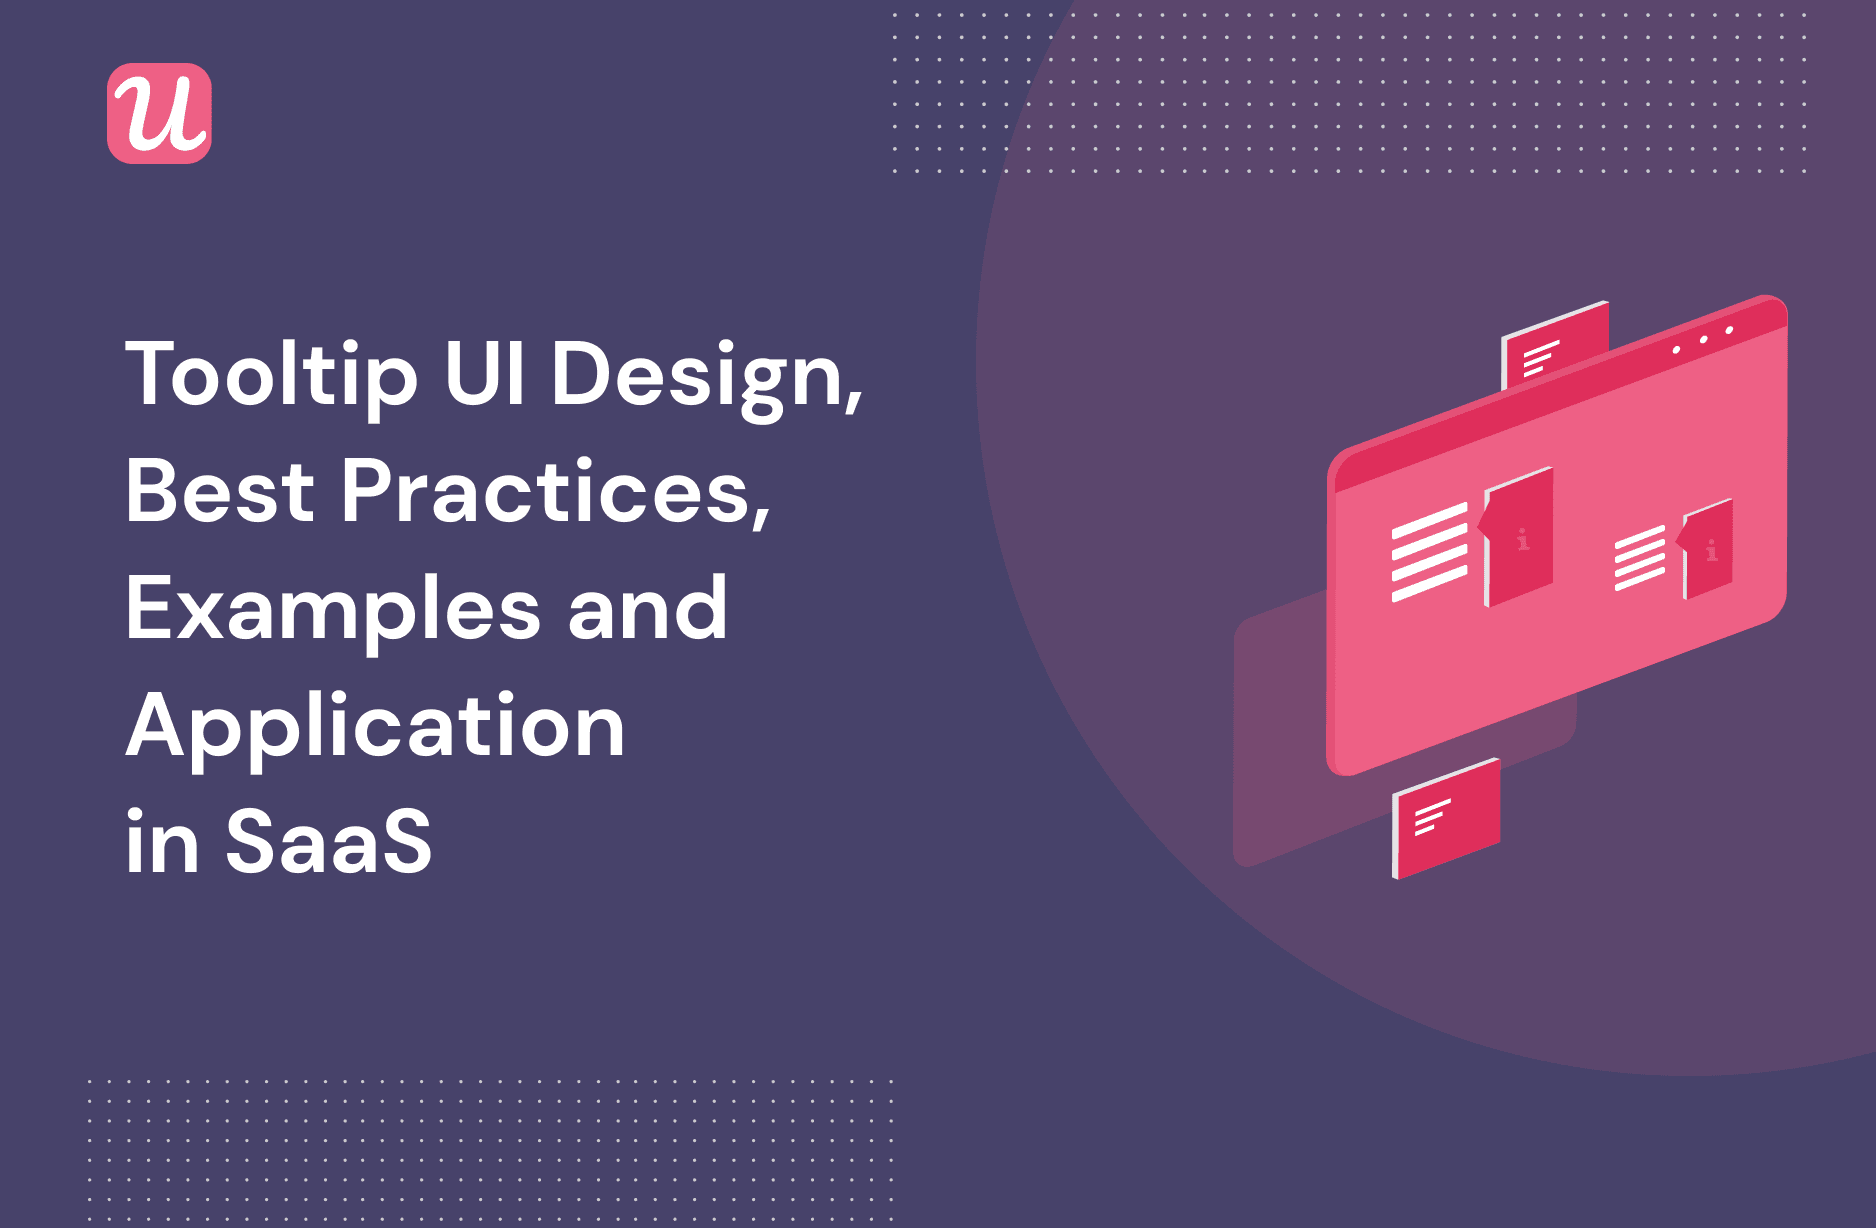 Tooltip UI Design: Best Practices, Examples and Application in SaaS